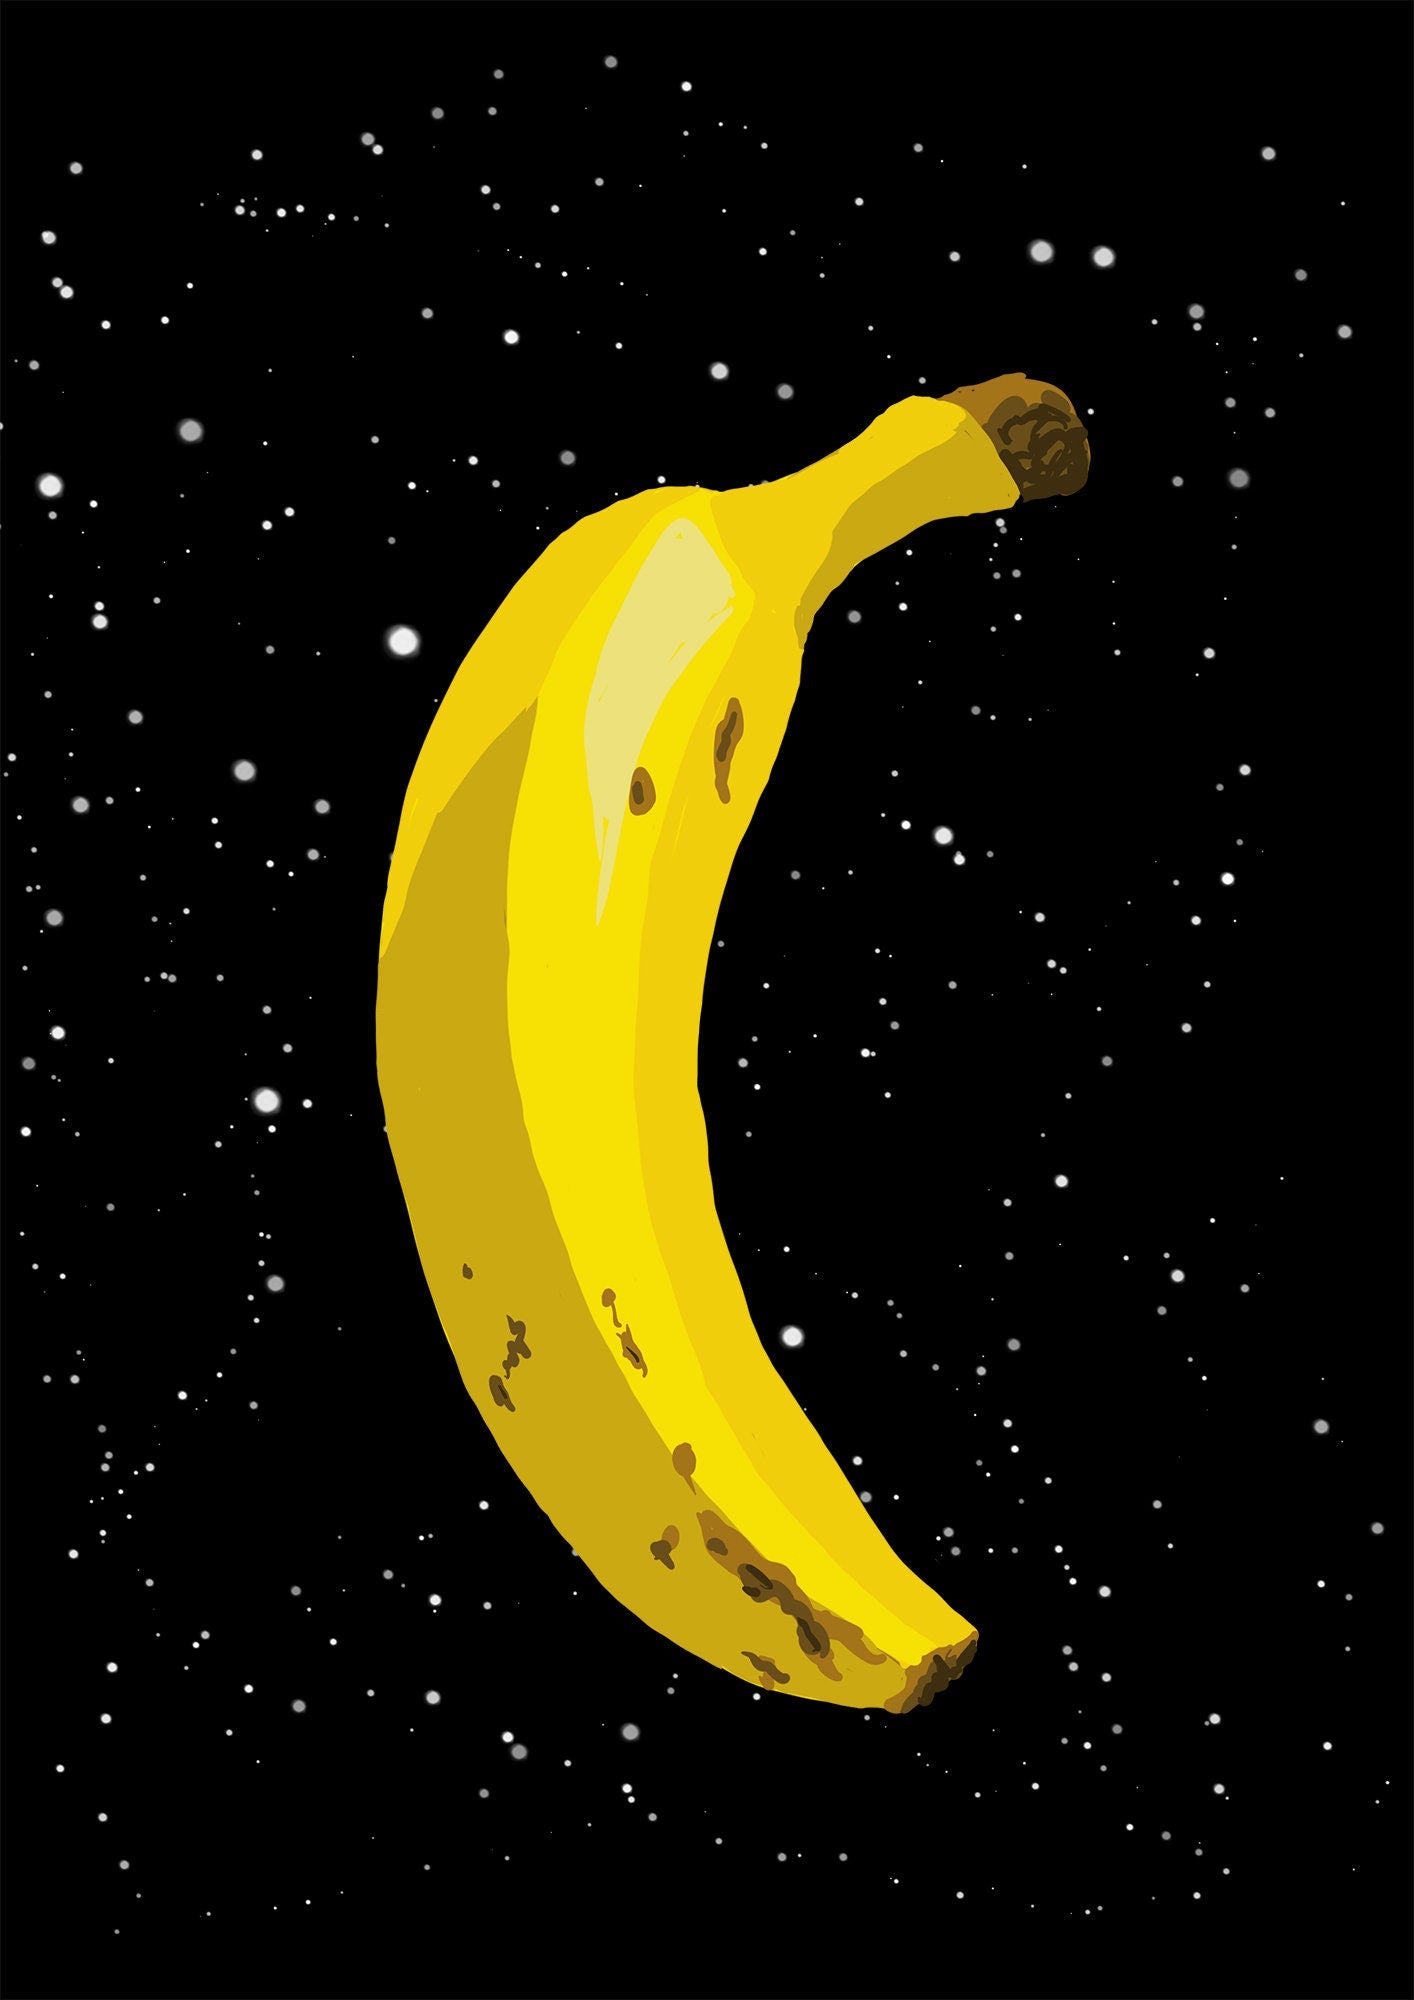 Banana in outer space greeting card | Banana | Bizarre | Weird | Personalised Cards | Outer Space | Birthday Card | Quirky Card |  Cards